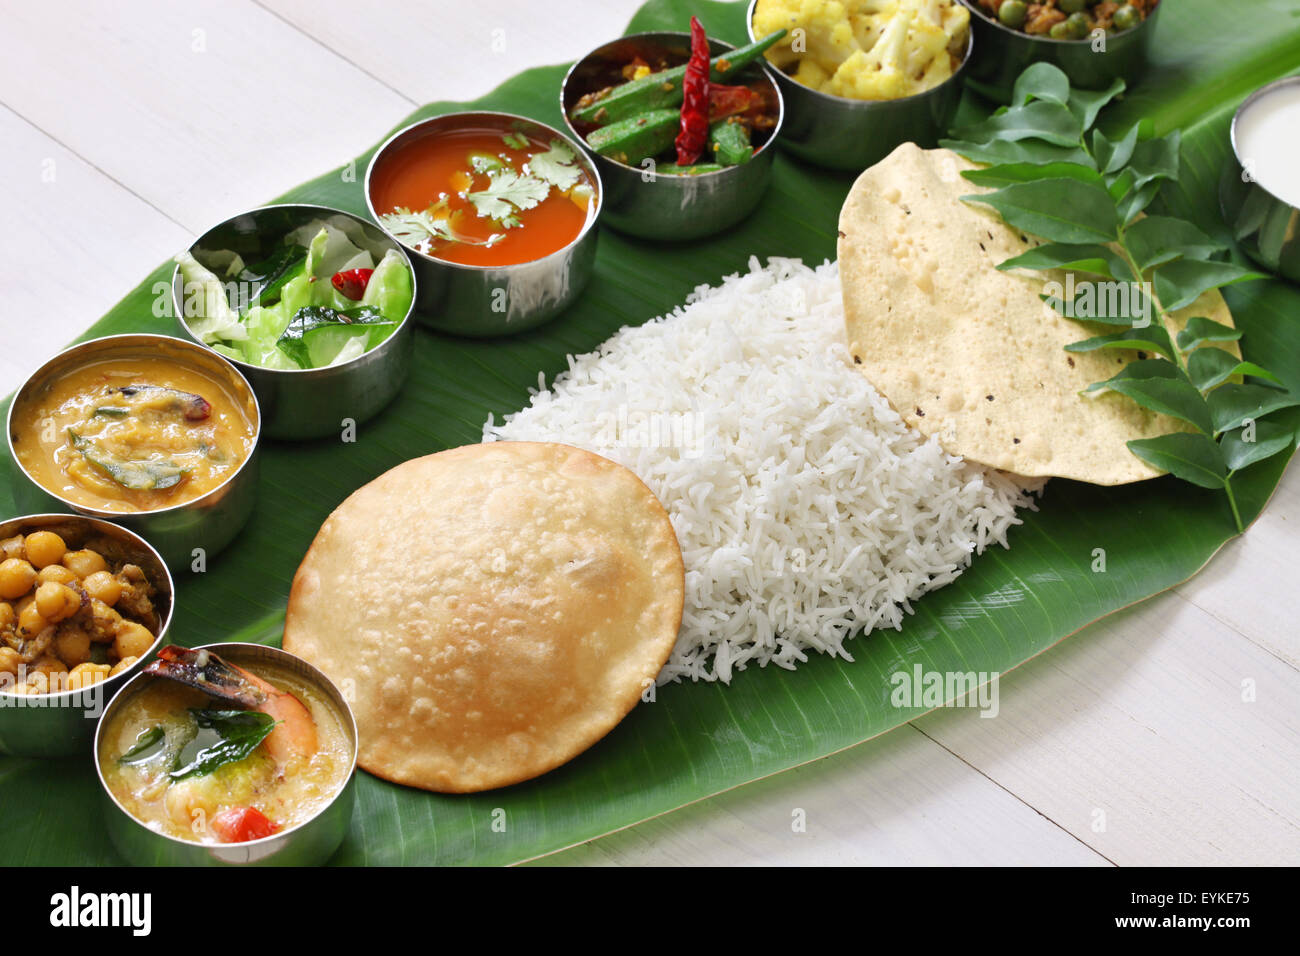 meals served on banana leaf, traditional south indian cuisine Stock Photo